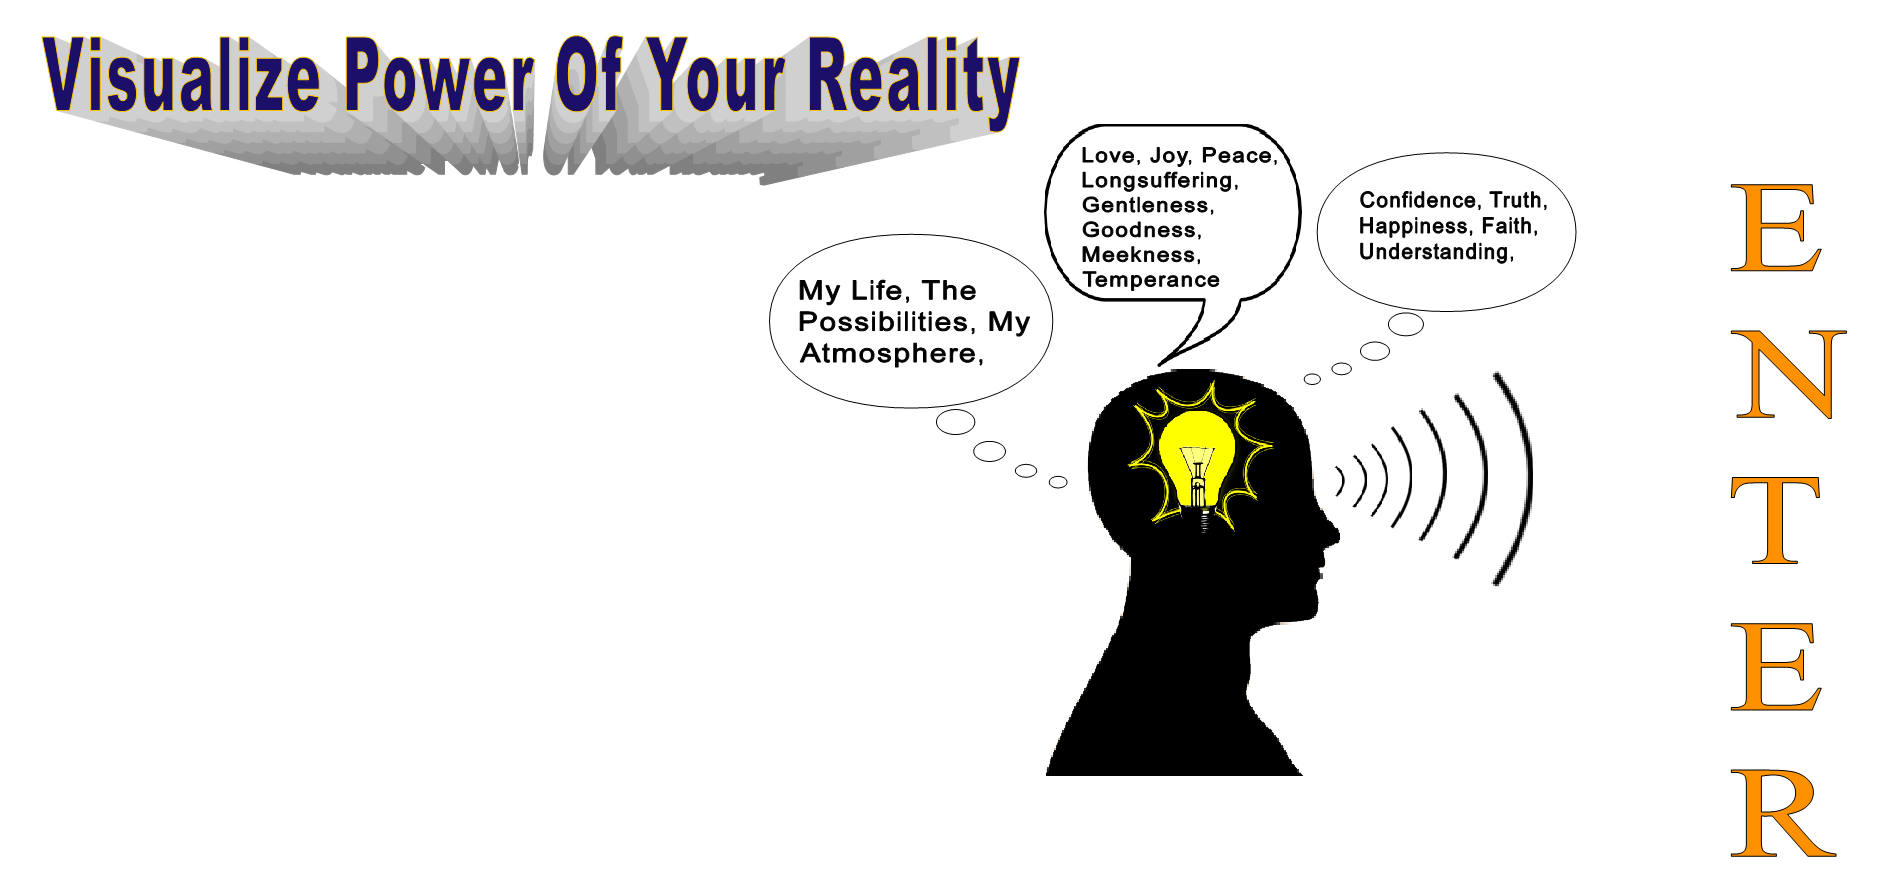 Visualize Power of Your Reality